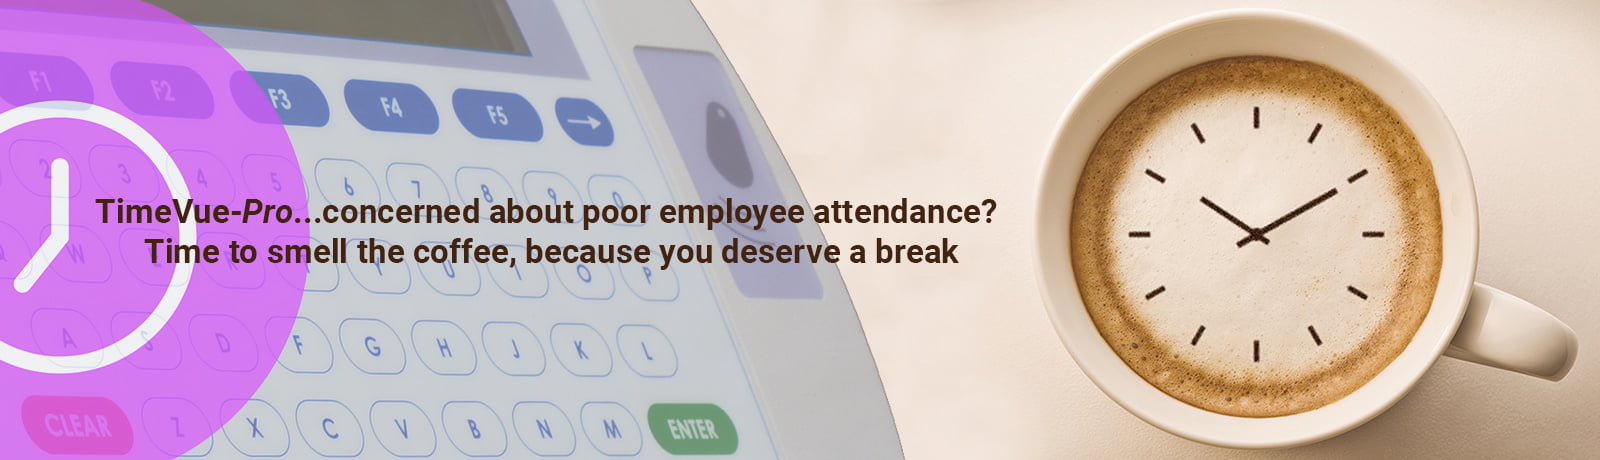 TimeVue-Pro Time and Attendance Software. Identify absence and sickness trends